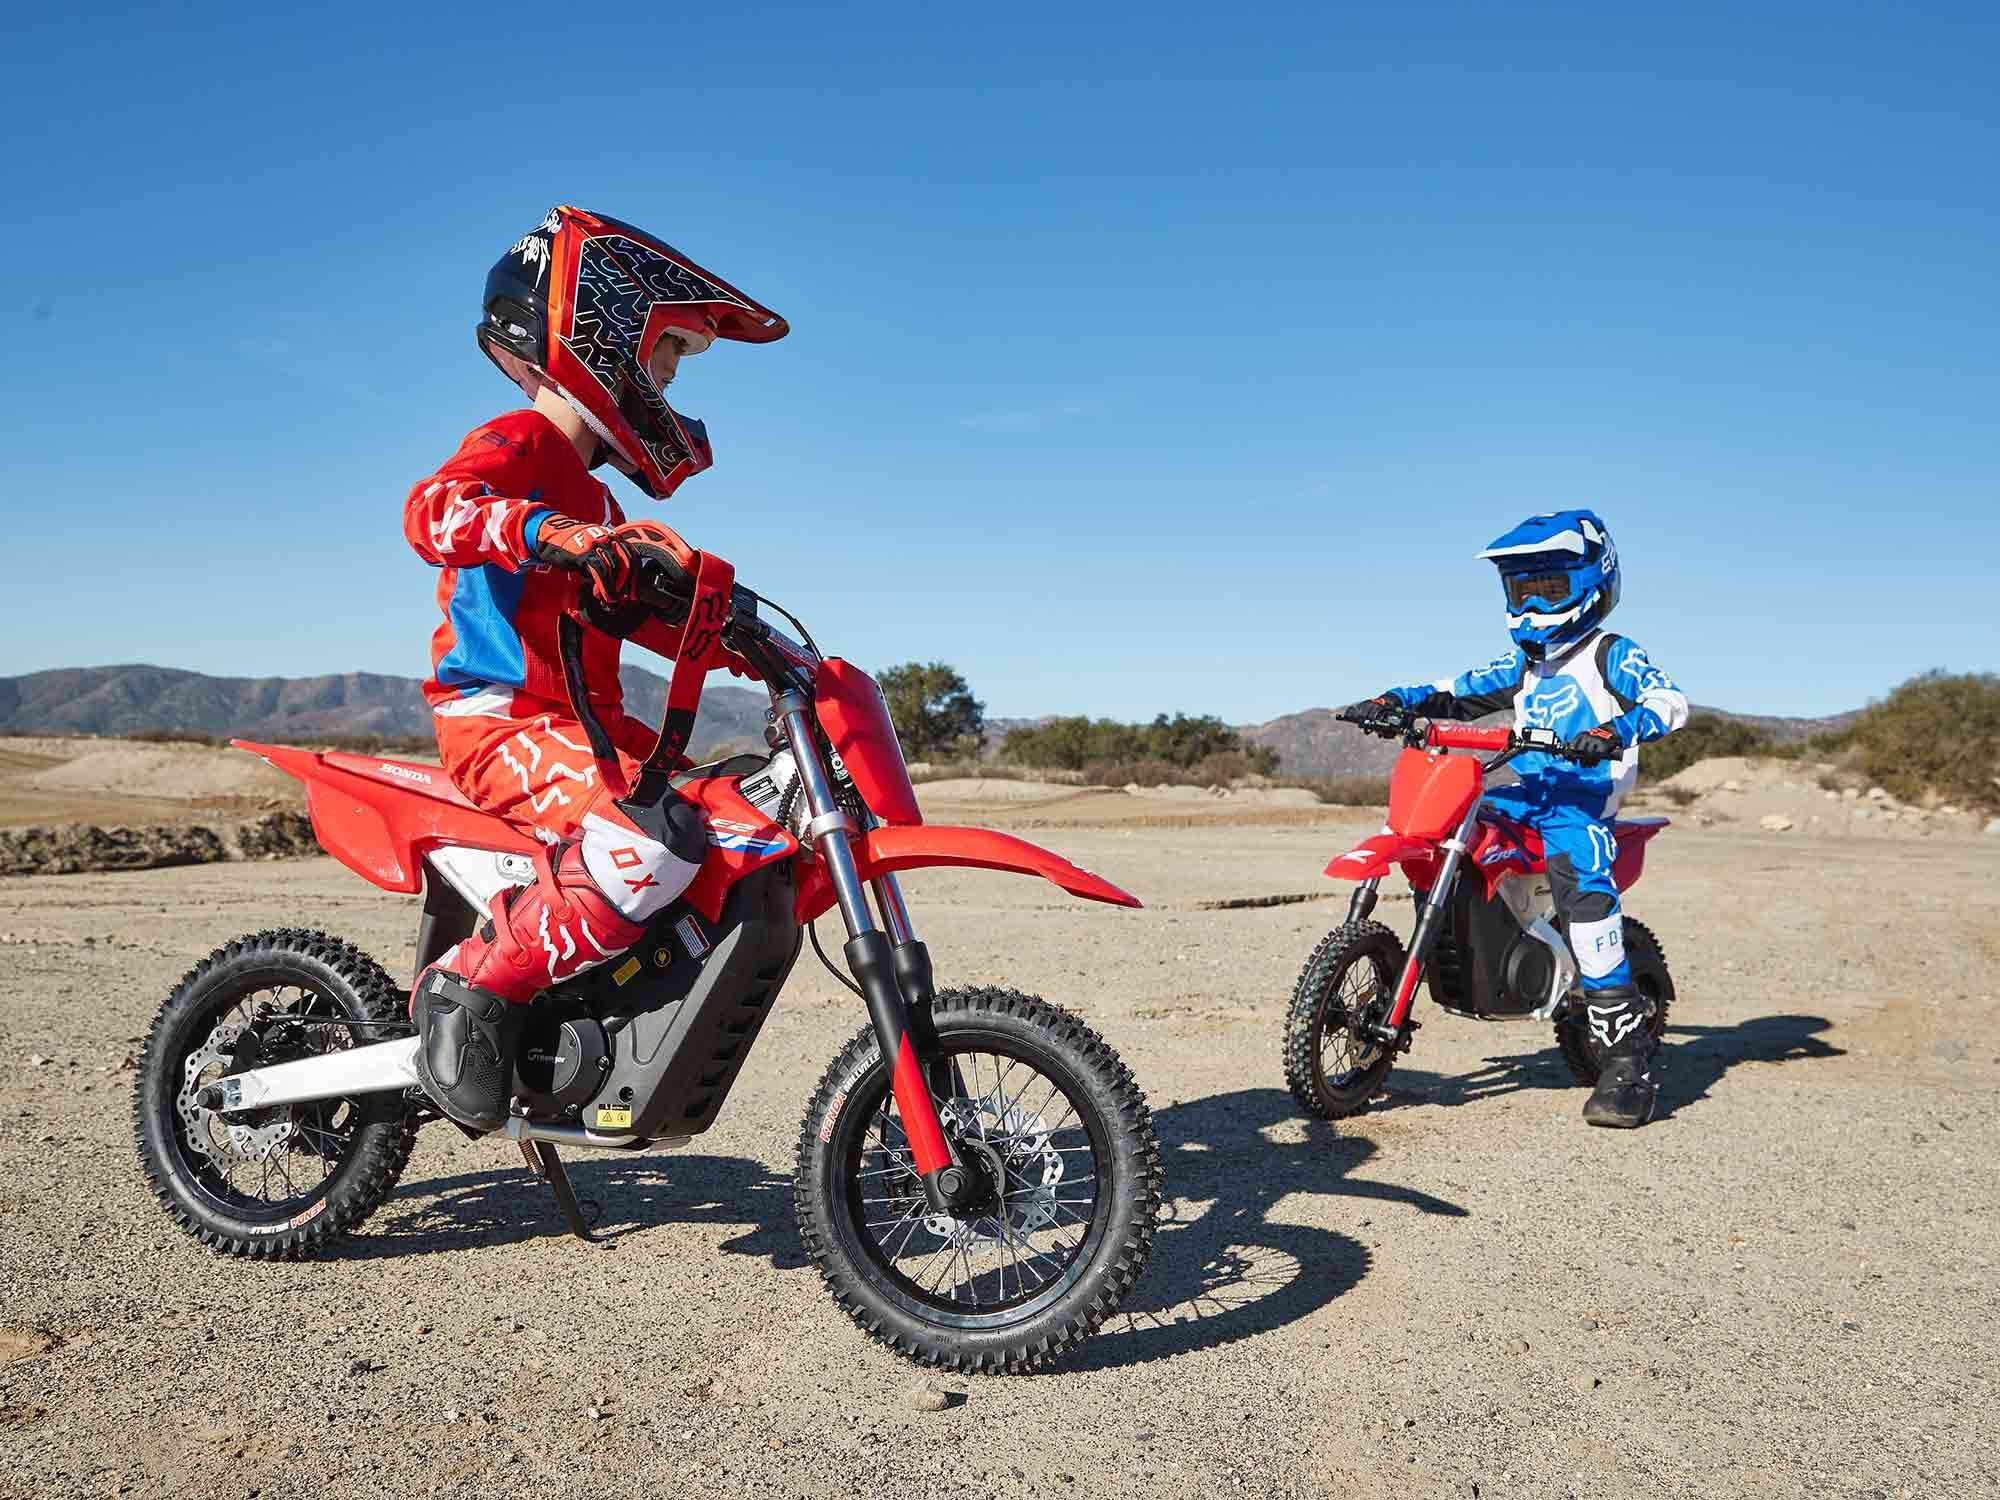 A solid electric minibike for kids under 99 pounds.